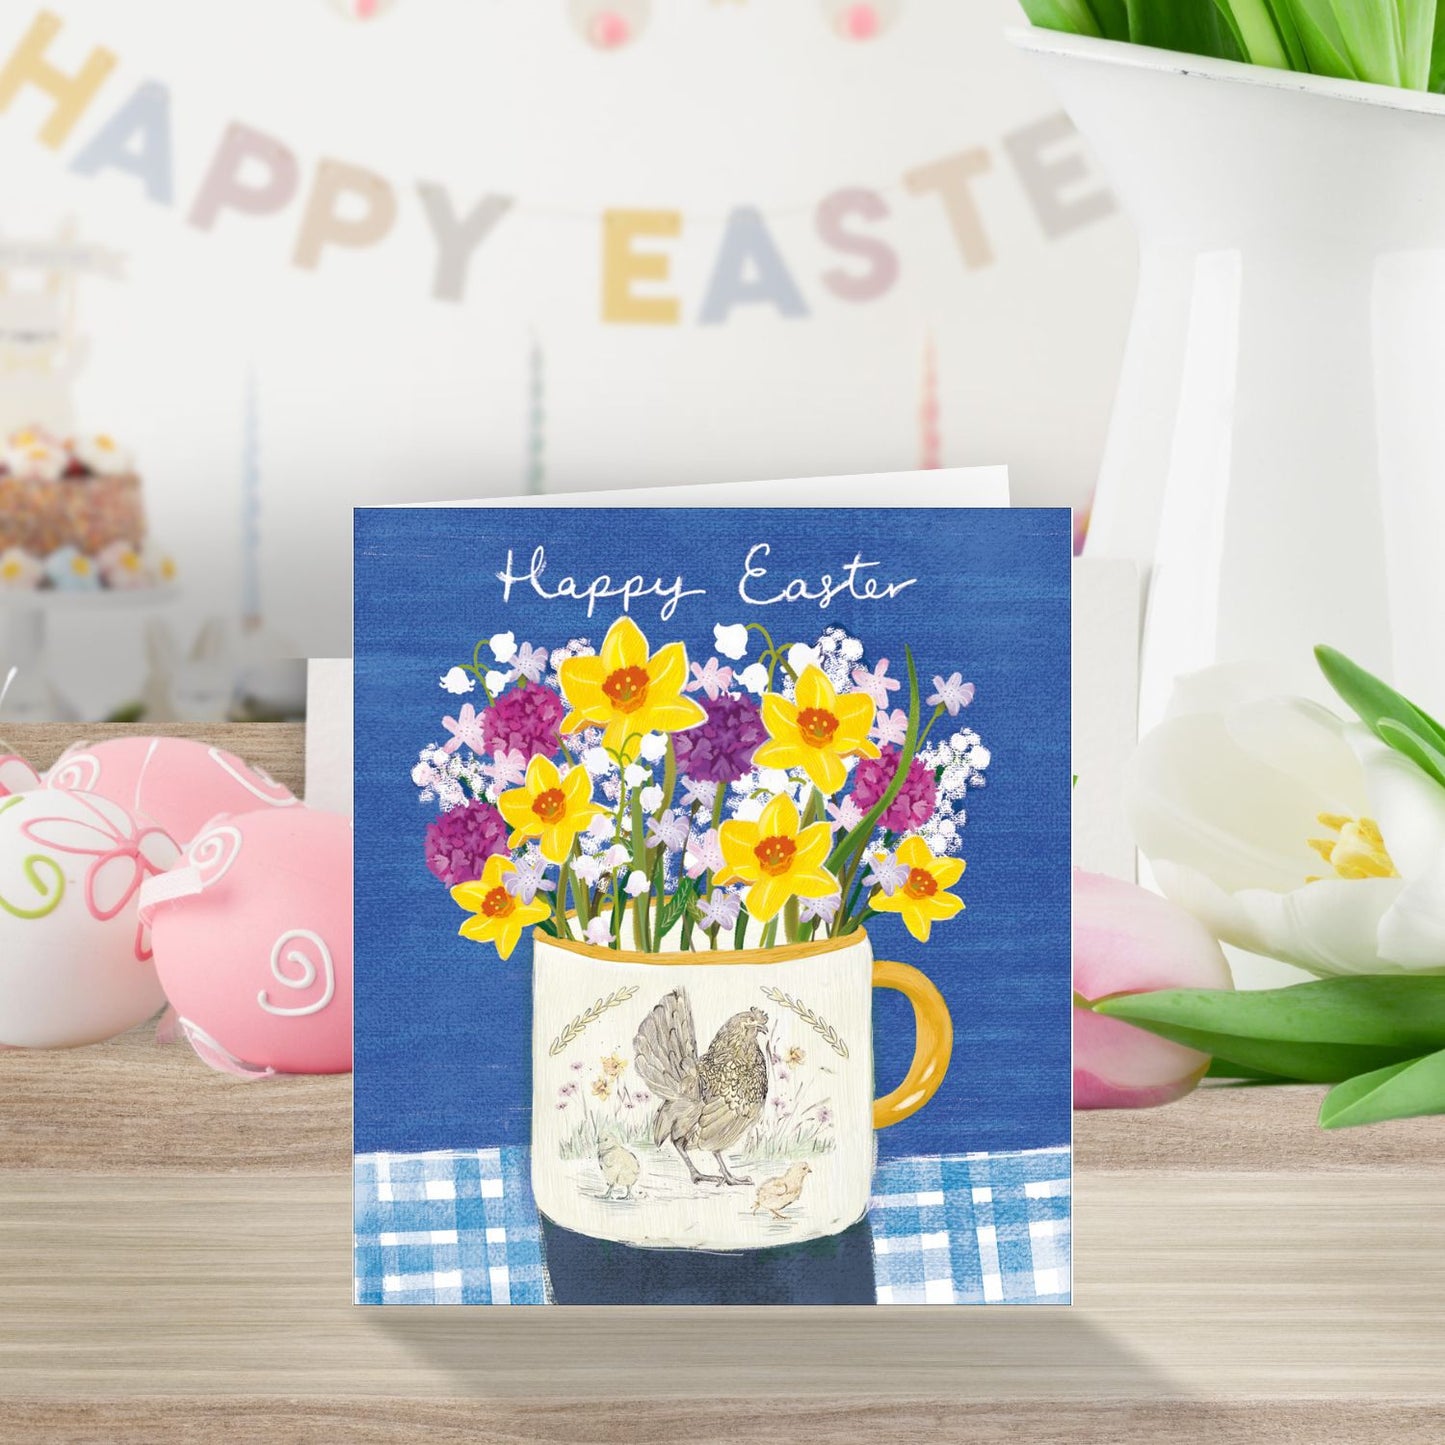 Pack Of 5 Happy Easter Spring In A Mug Artistic Pack Of Easter Greeting Cards